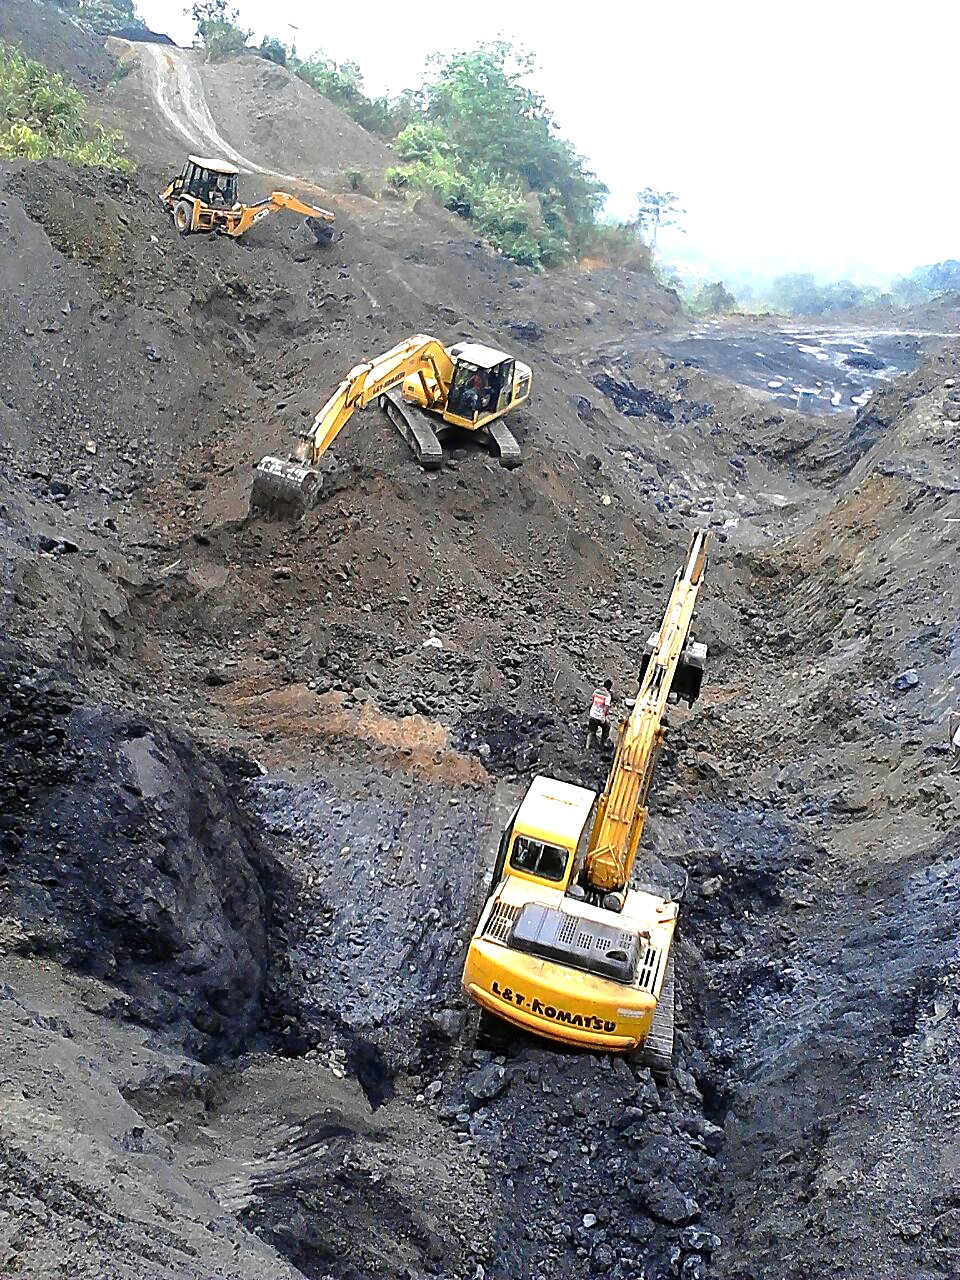 Earth moving machineries seen scoop digging at an open cast coal mining site in Mokokchung district recently. Coal trading in Nagaland continues even in the face of a standing government order forbidding coal mining. (Morung file photo)